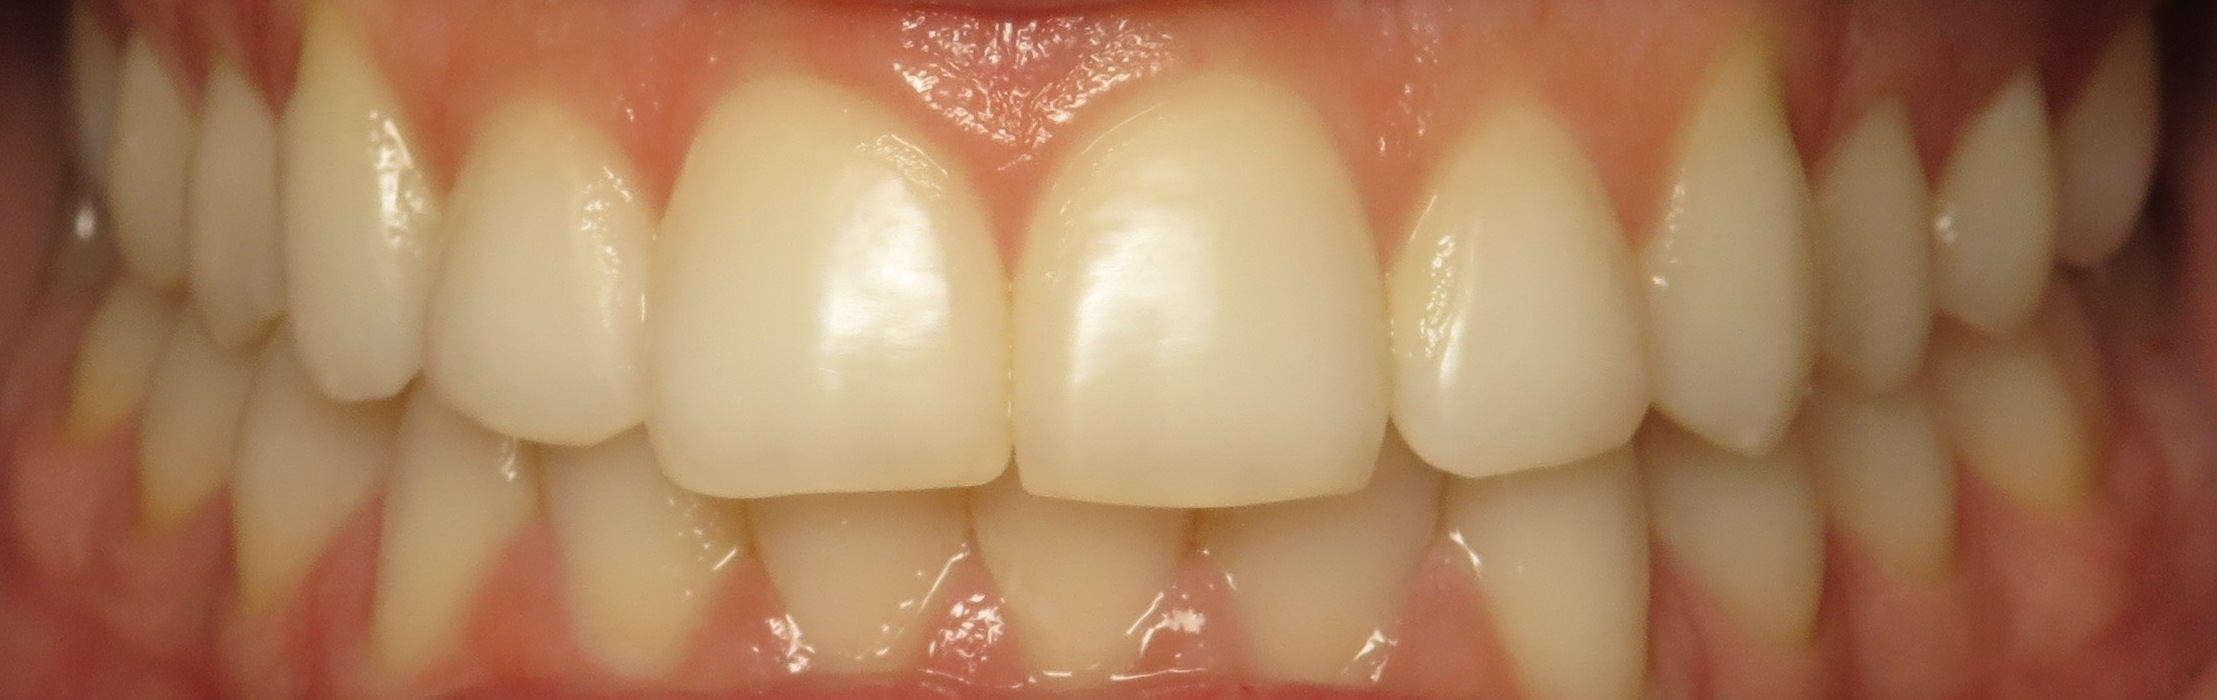 Thousand Oaks Family Dentistry - Golden Proportion Case 3 retracted smile.JPG